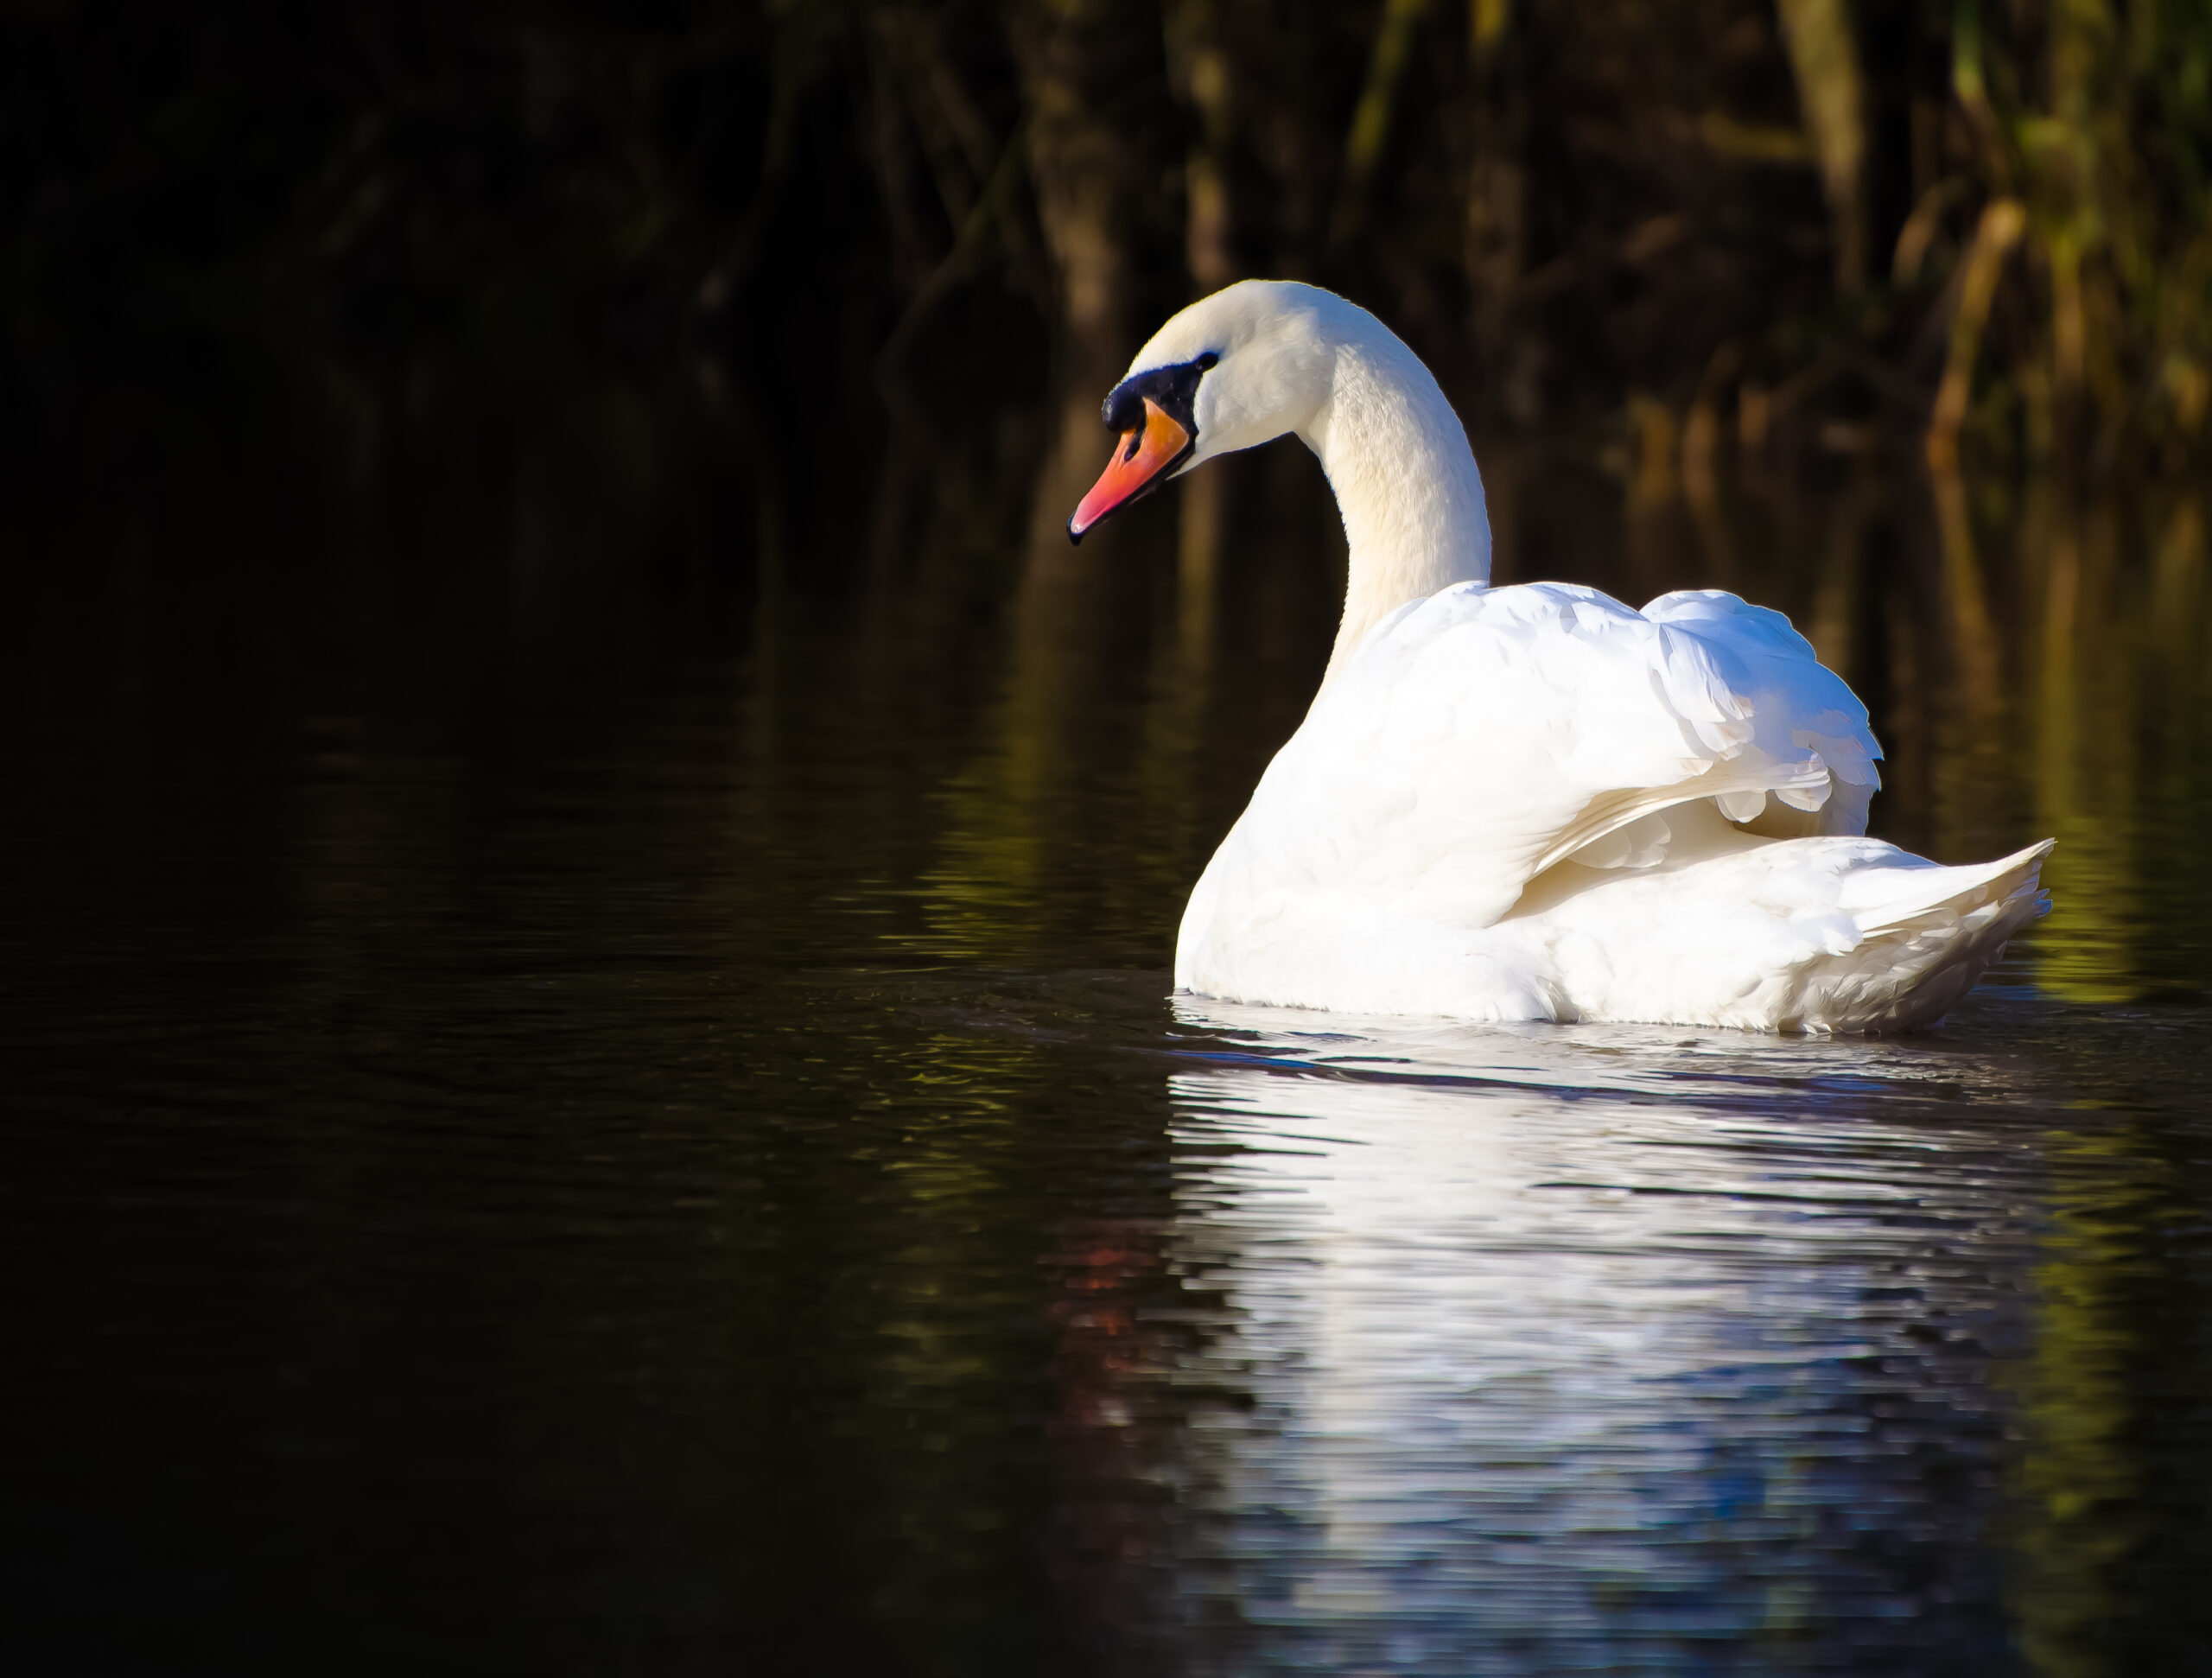 Swan swimming, reflected by the pond underneath. Background slightly fades into darkness on the left side